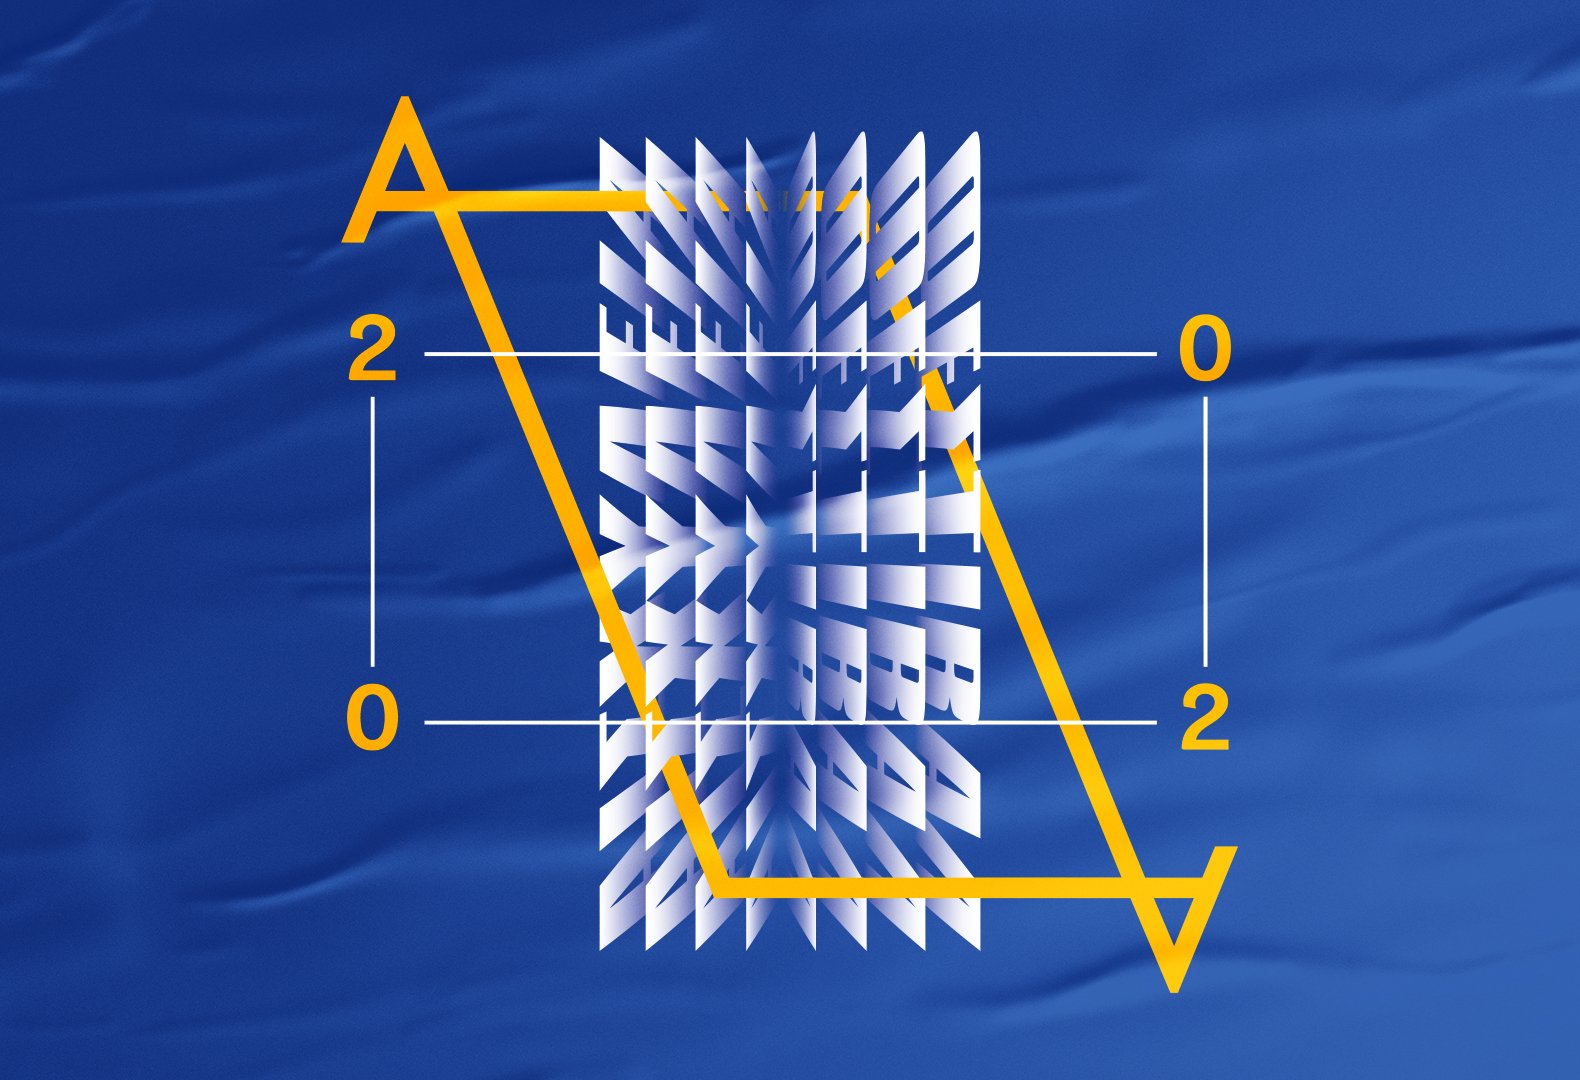 Blue, white and yellow key visual of communication design for Aeschylia Festival 2020